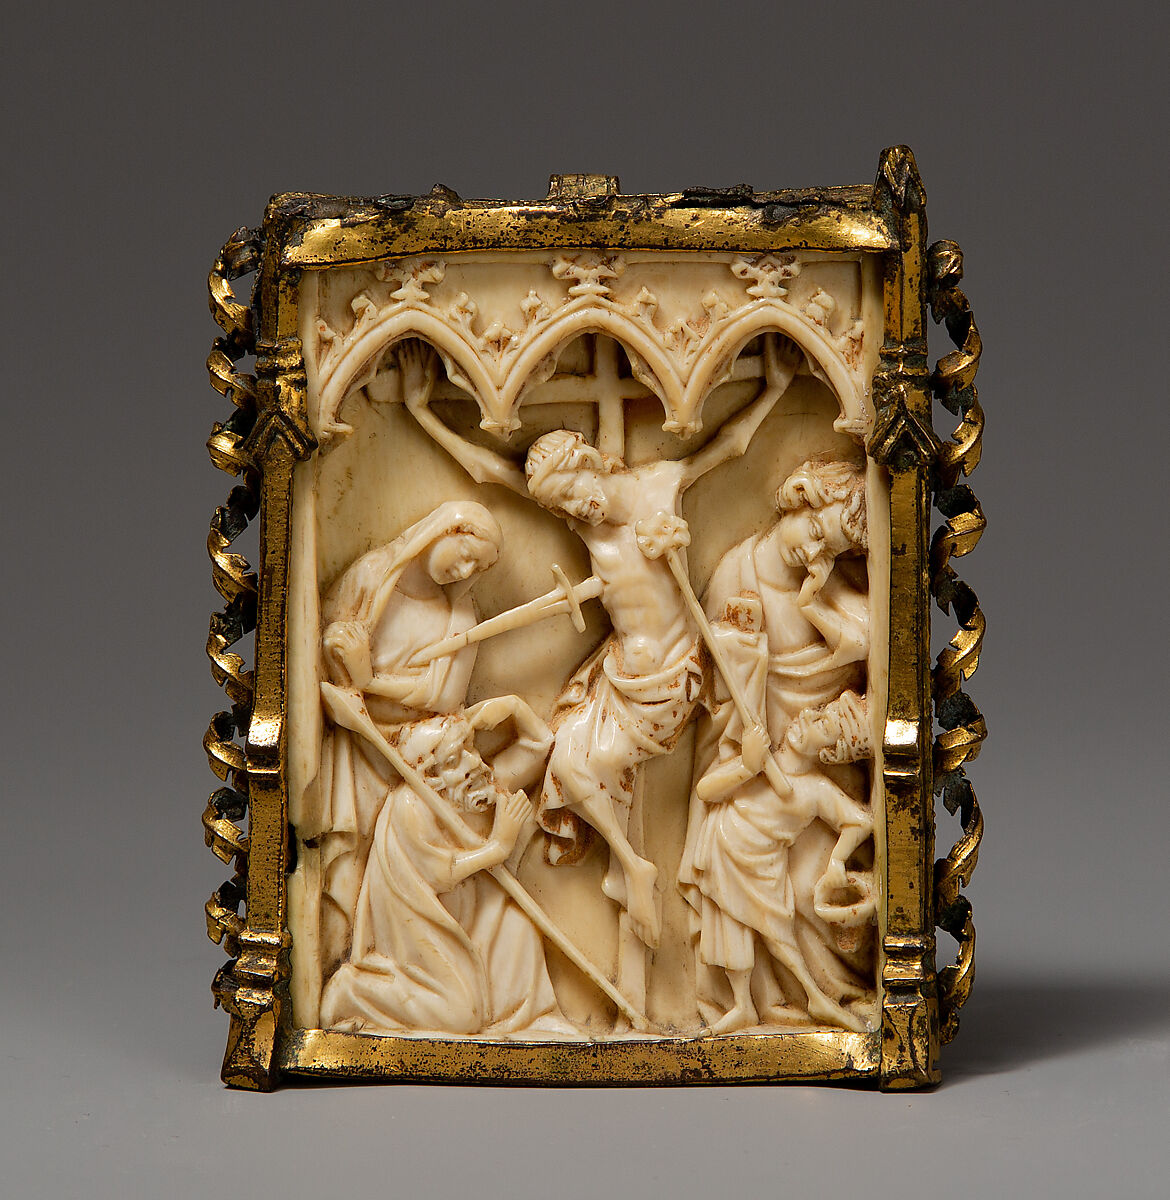 Pax with the Crucifixion, Ivory and copper gilt, South German 